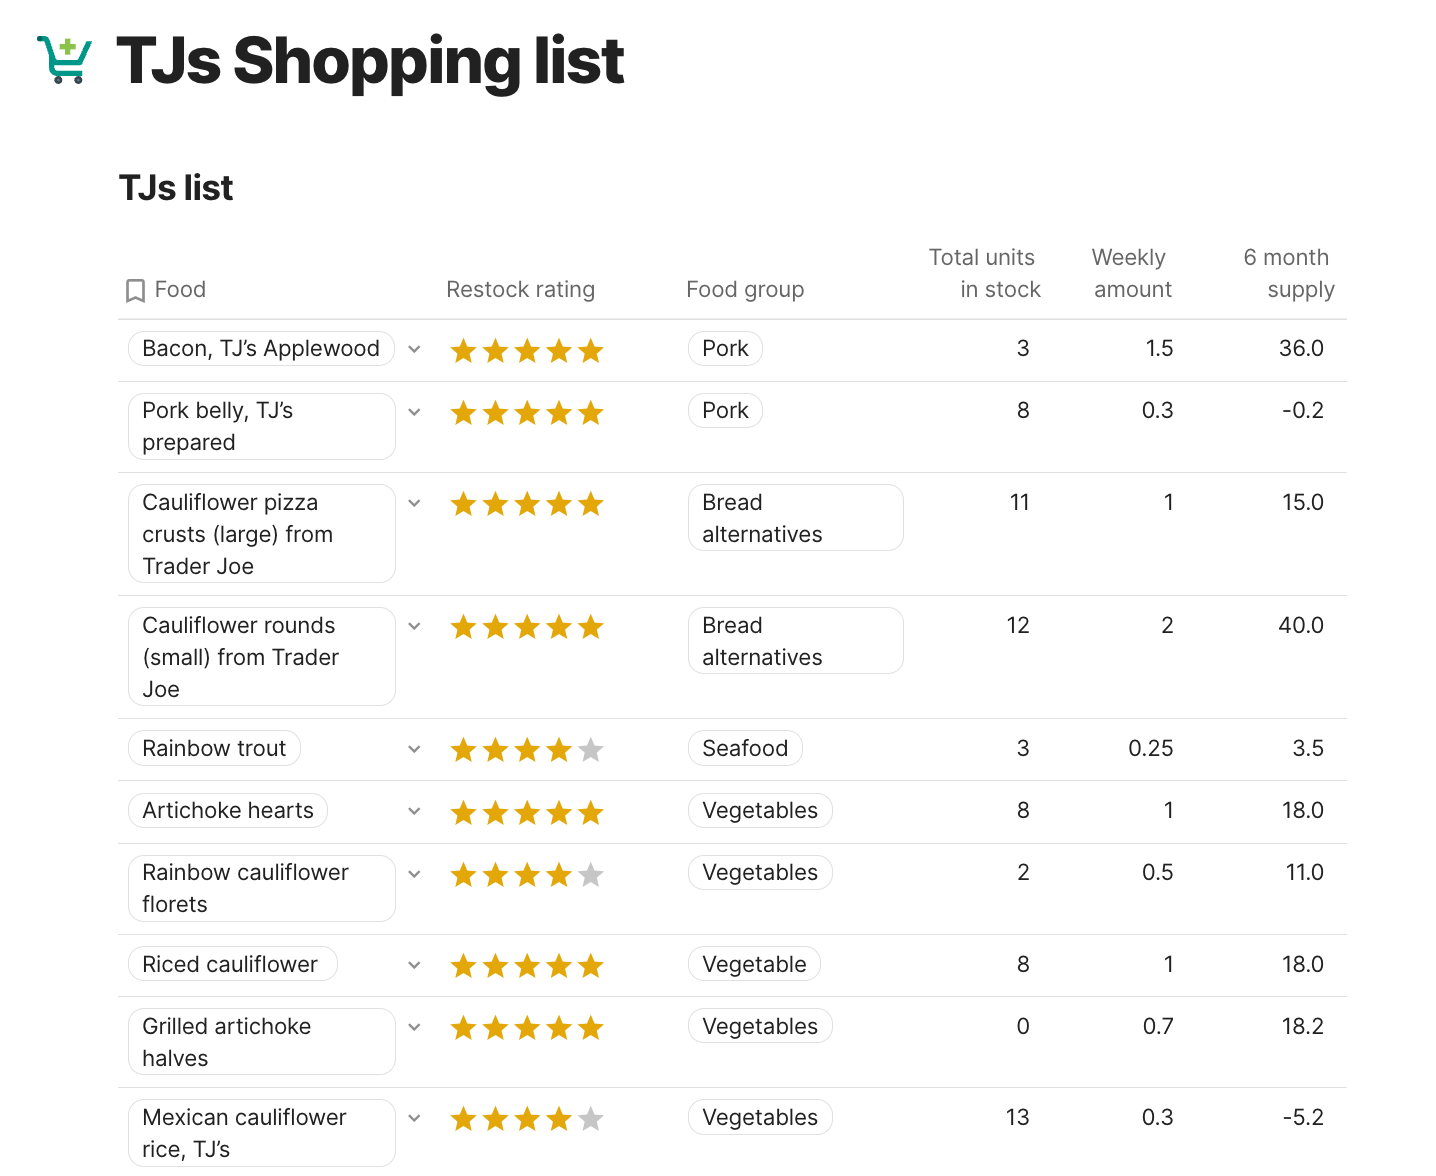 TJs Shopping List shows favorite purchases, ratings, total units on hand, weekly amount consumed, and a calculation of the number of units required to make up a 6-month supply.